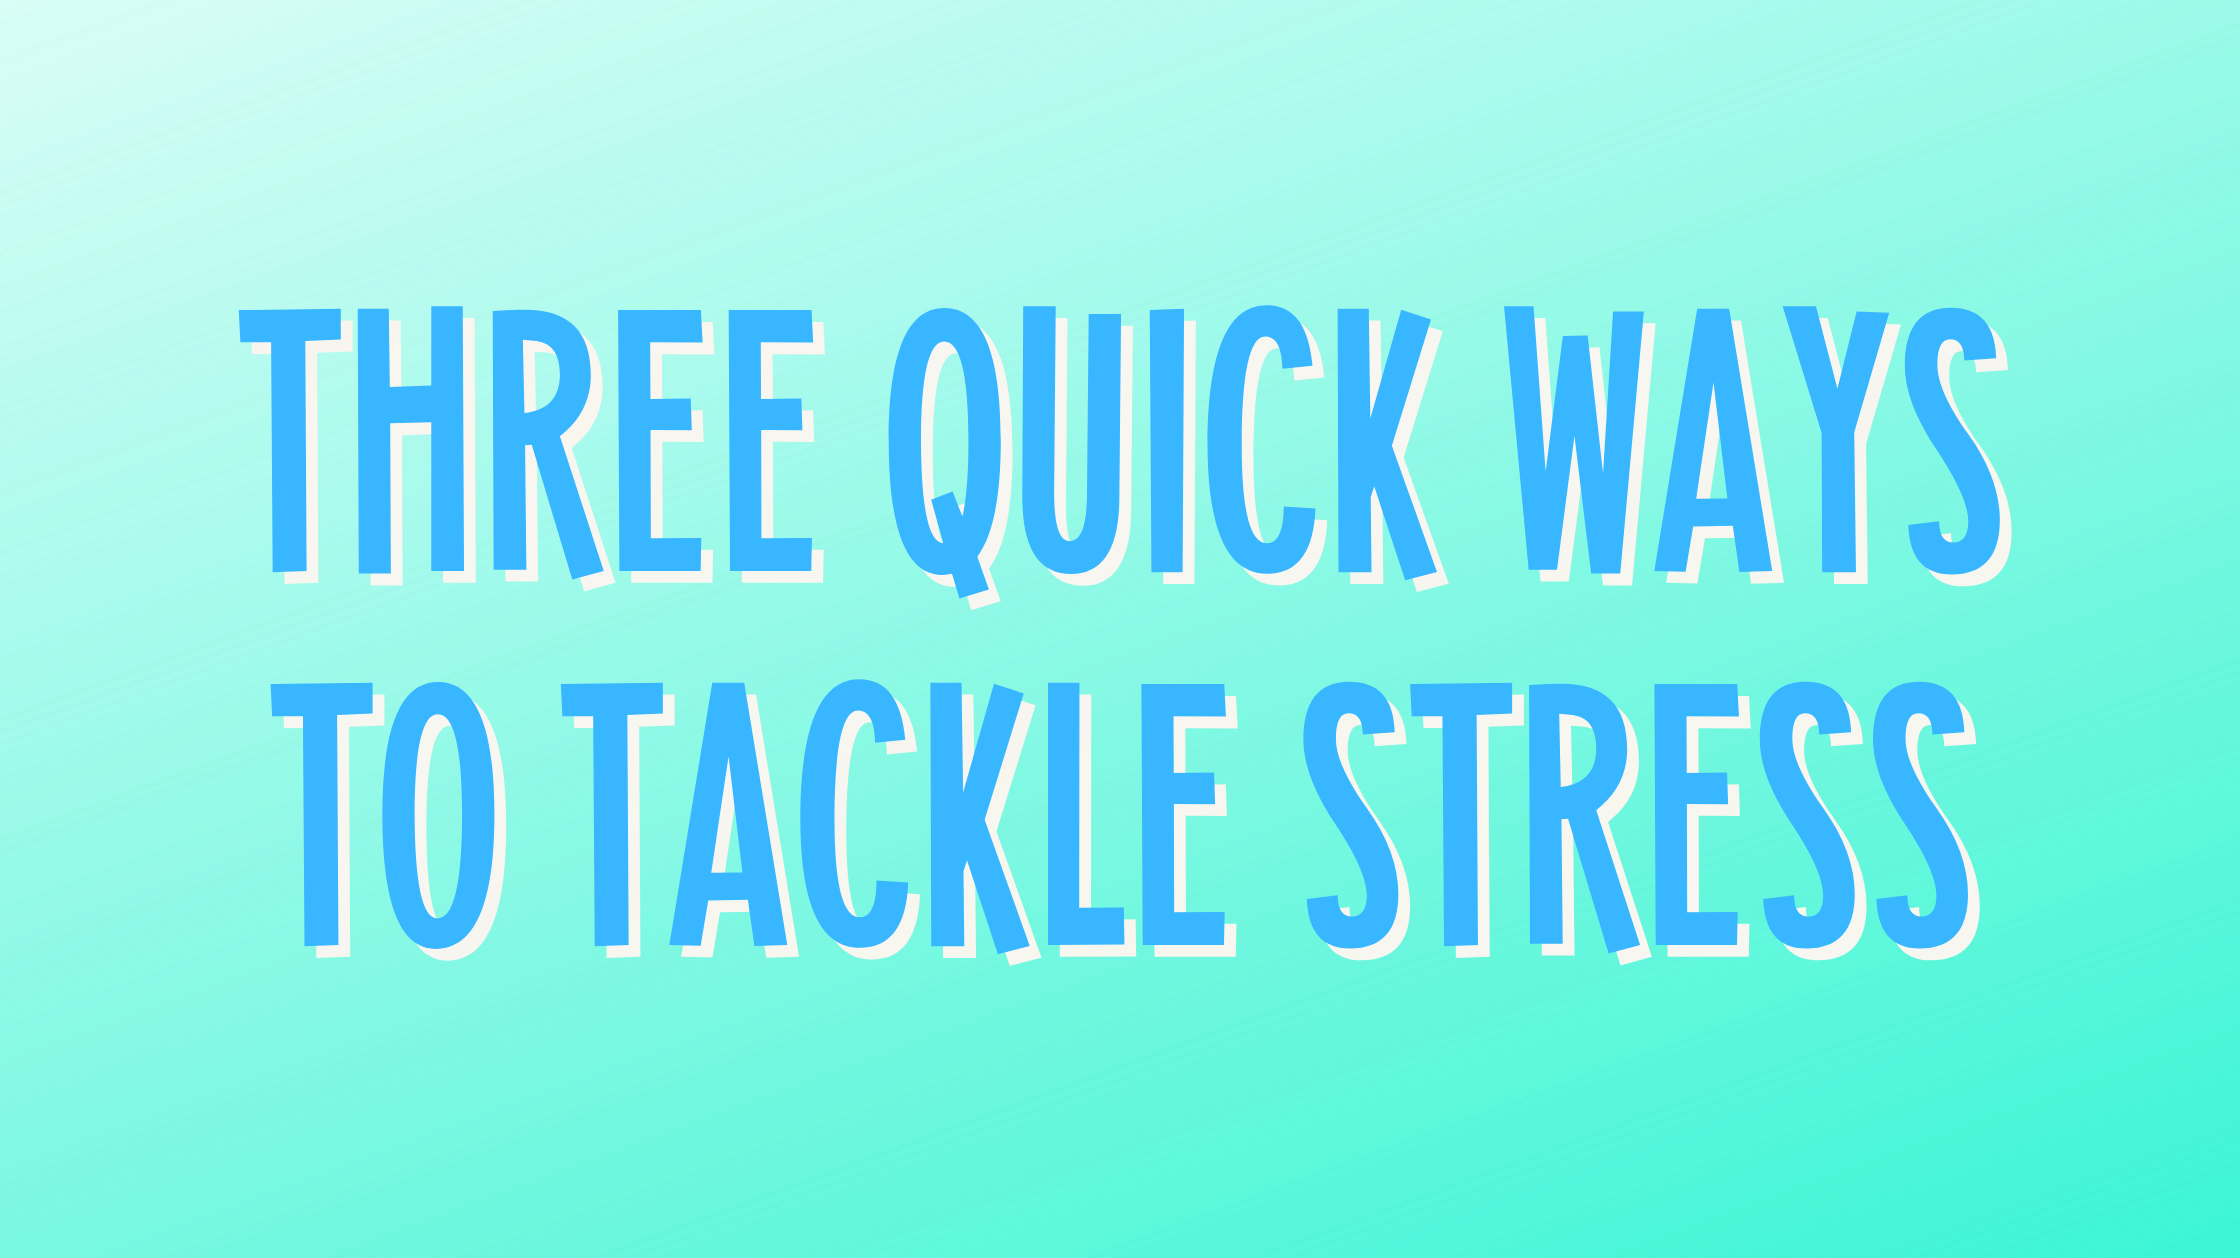 Three quick ways to tackle stress